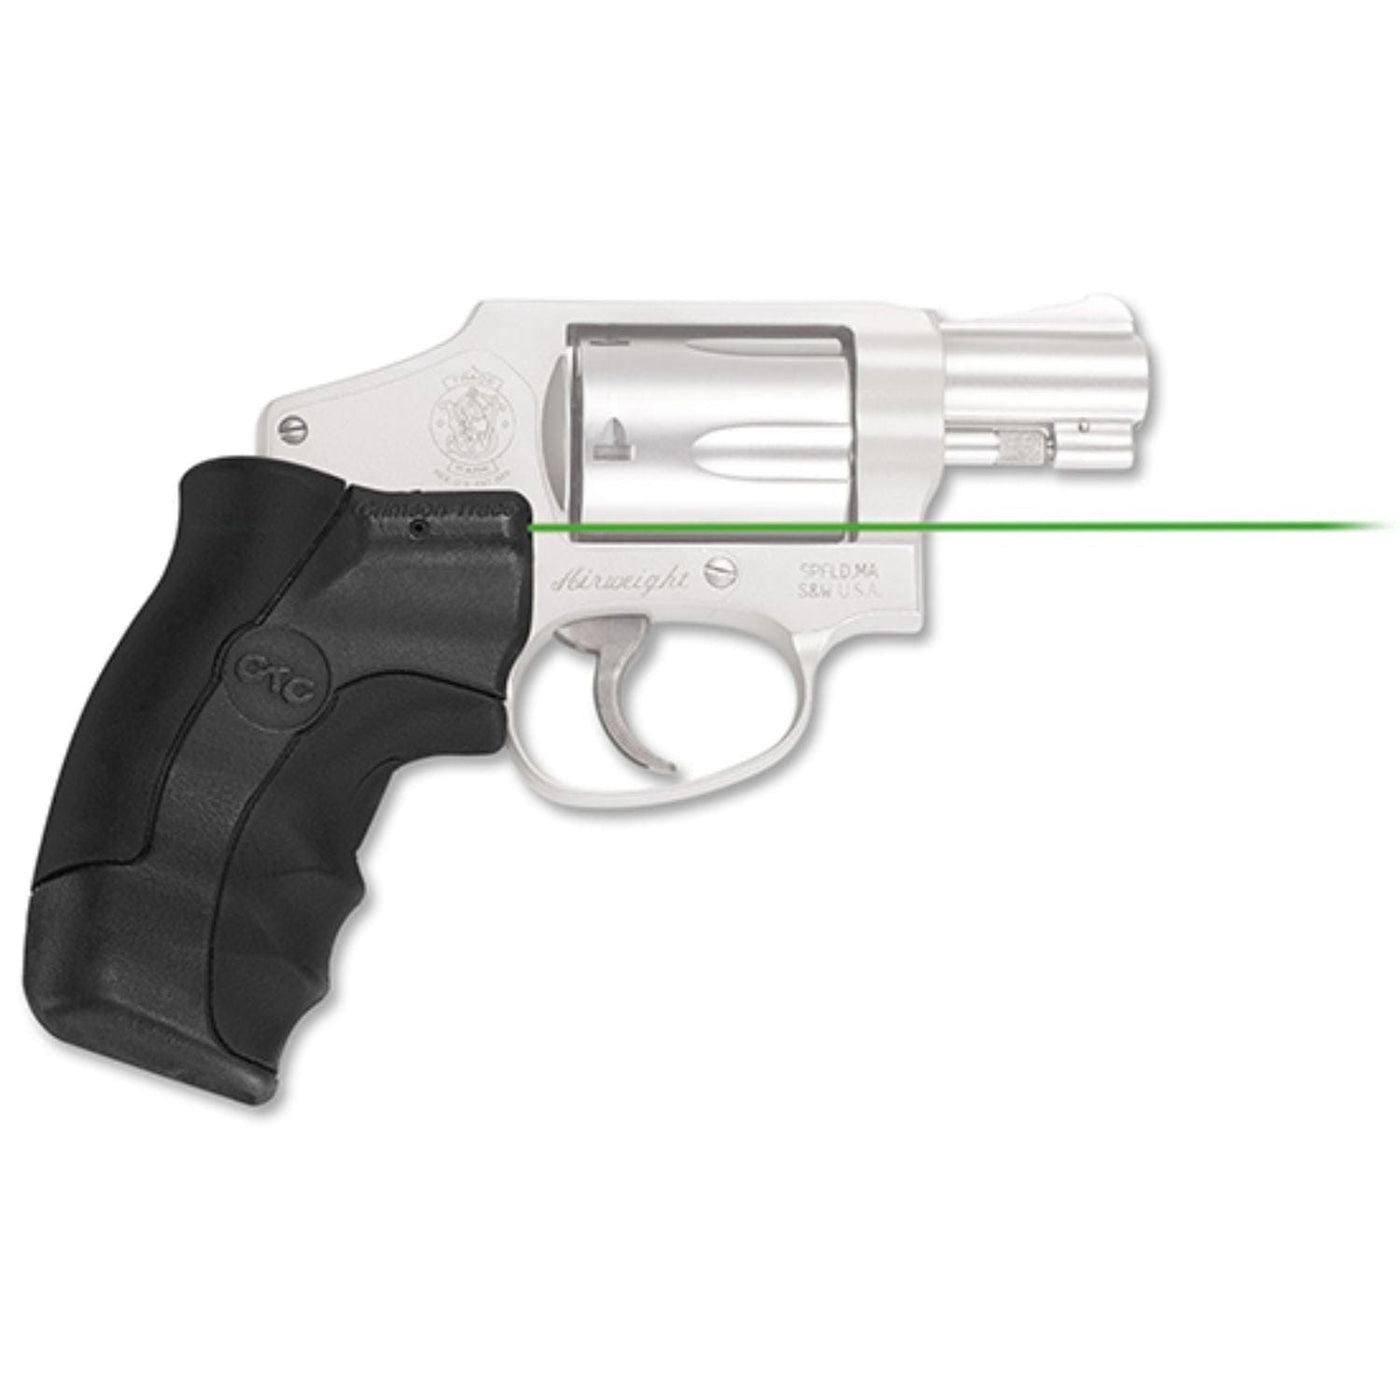 Crimson Trace Crimson Trace LG-350G Green Lasergrips for Smith and Wesson Optics And Sights